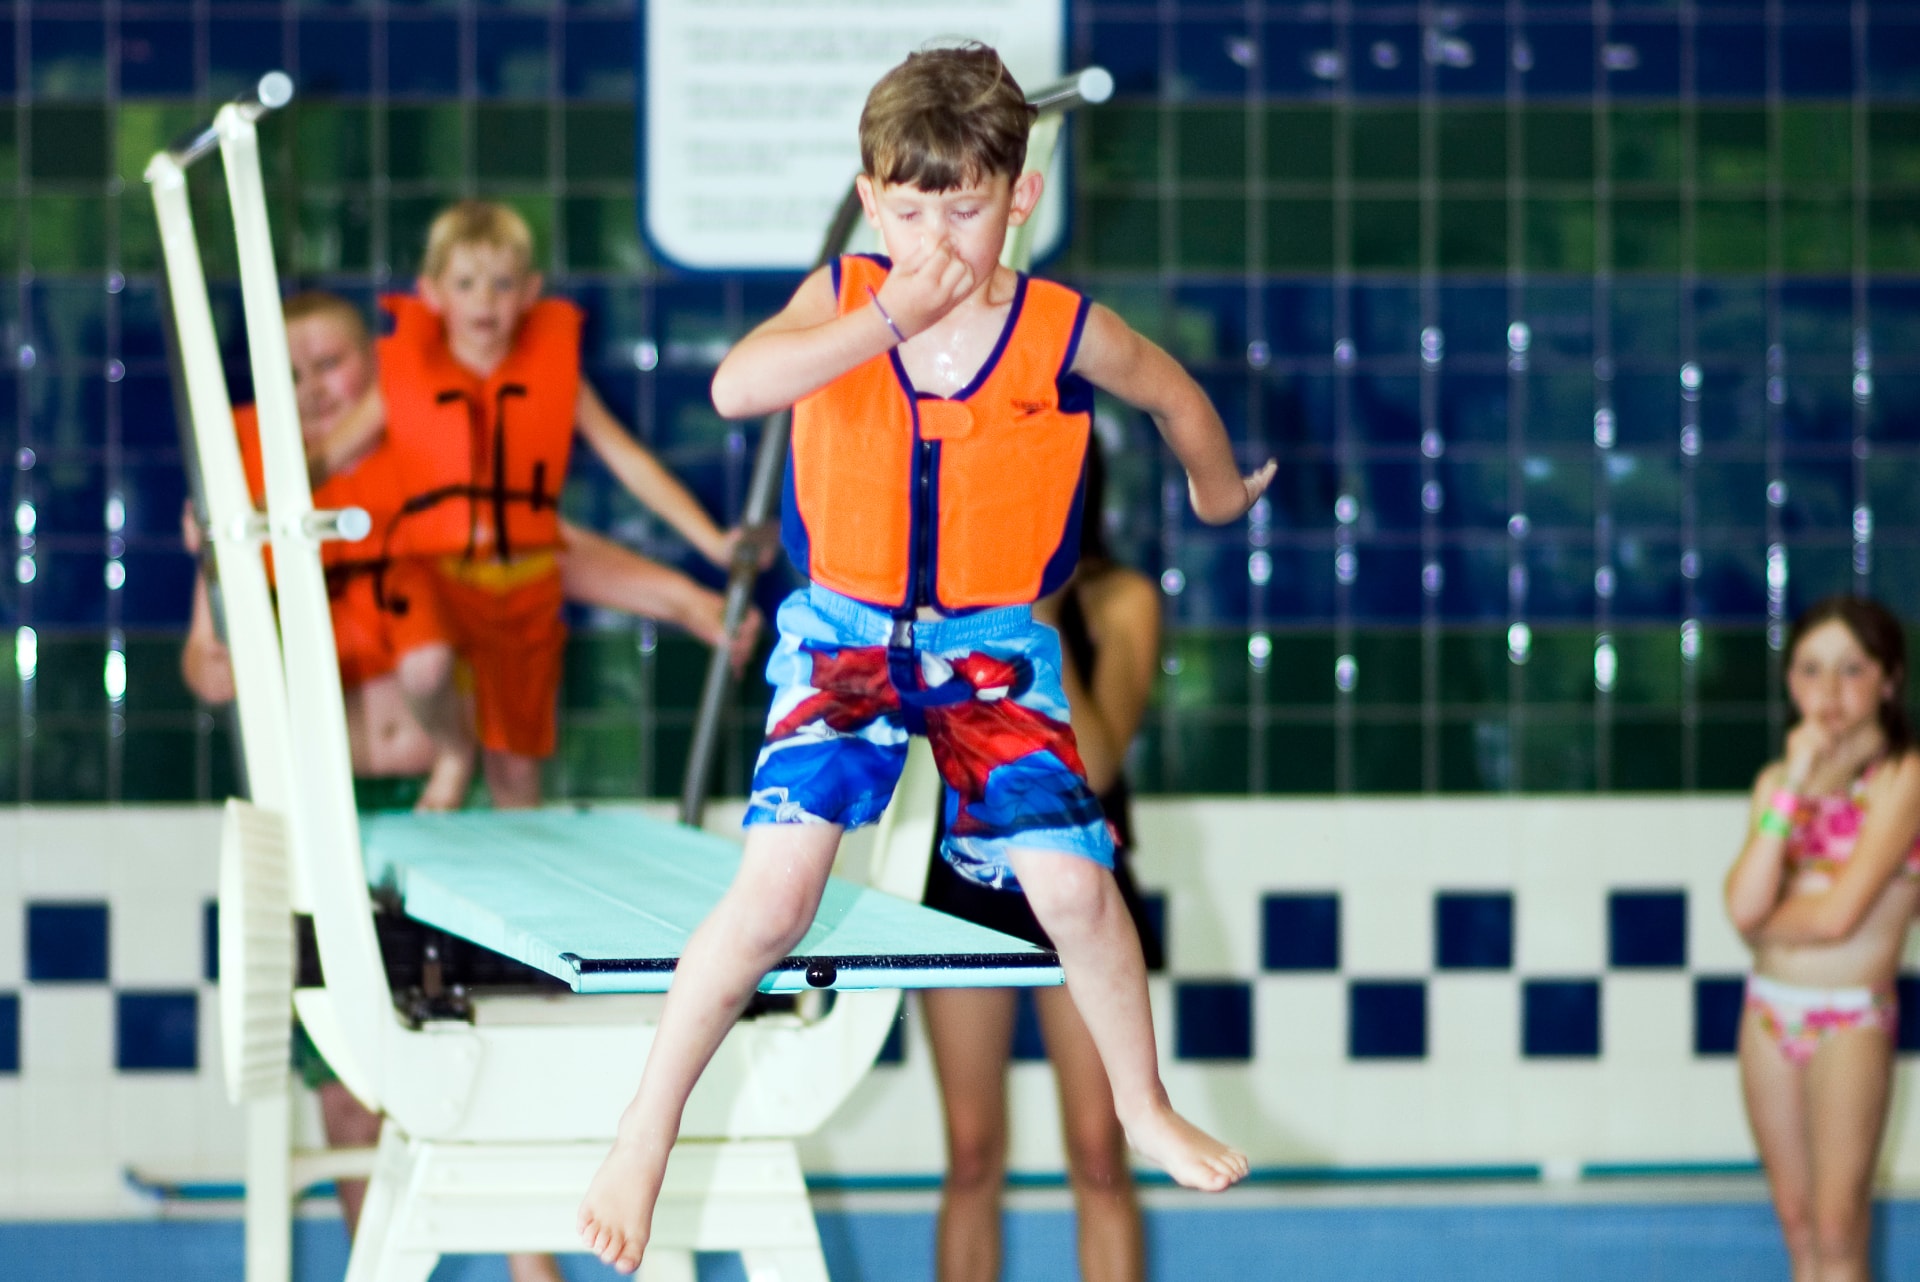 Child jumping off diving board. 